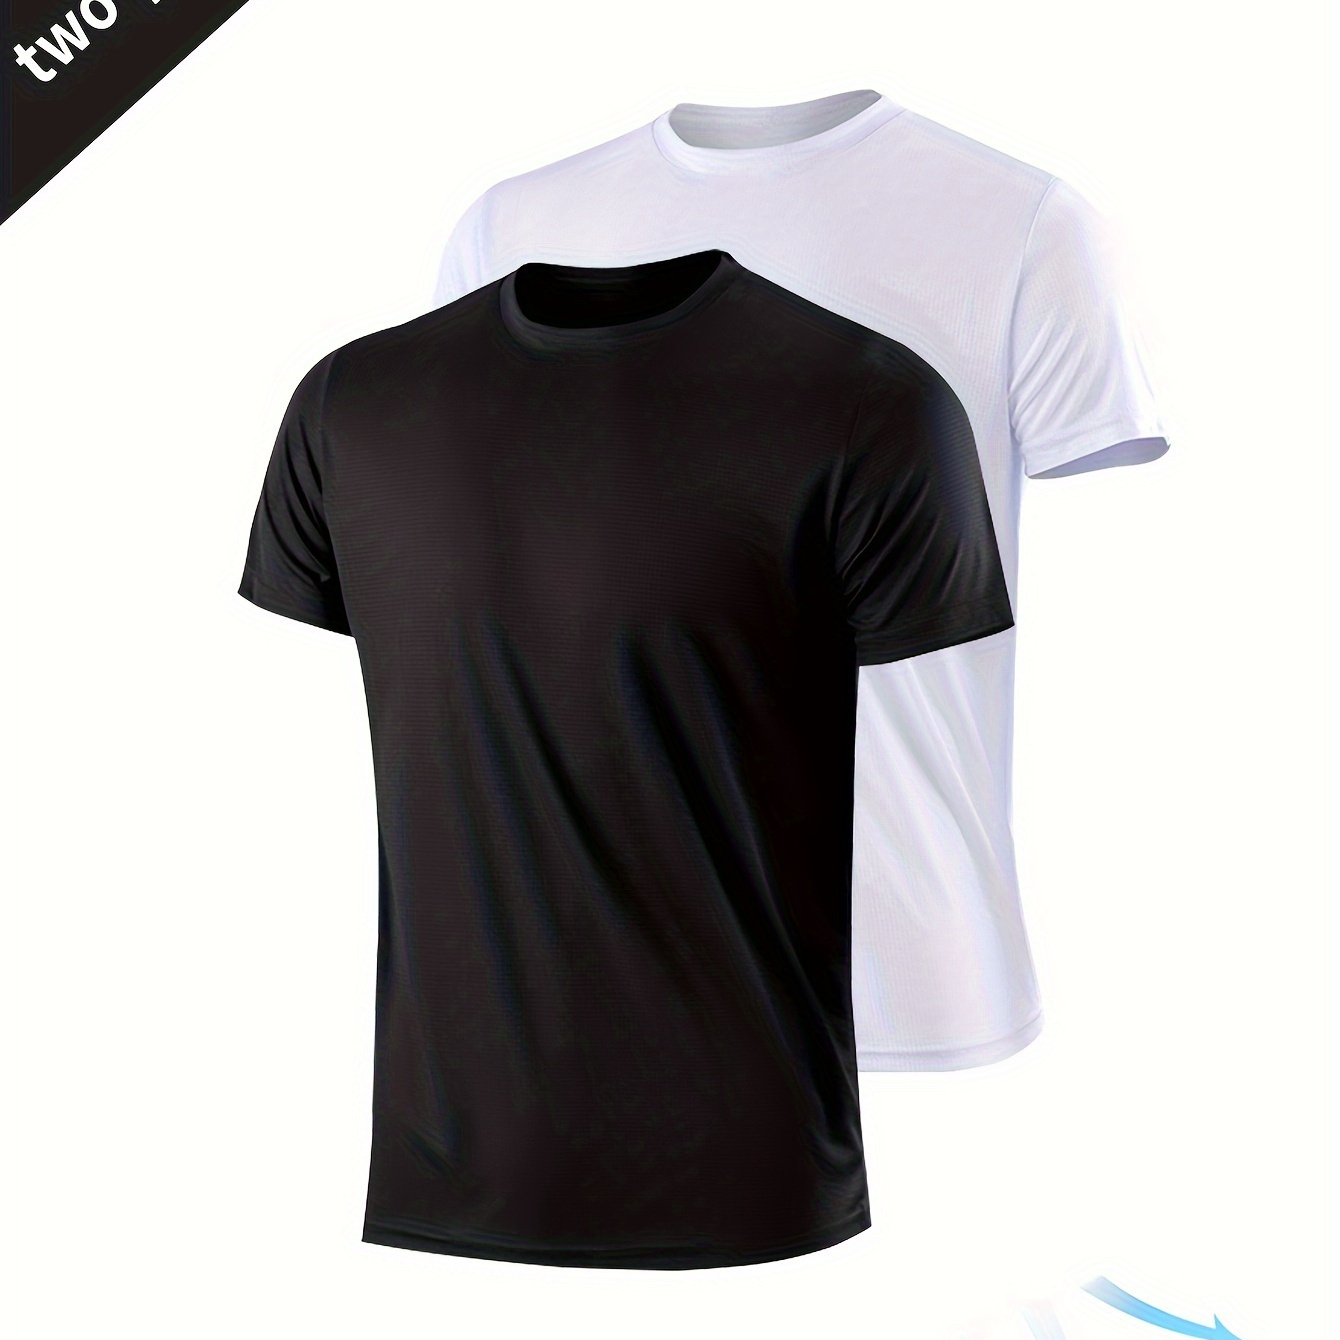 

2pcs Men's Quick-drying Running Casual Fitness Sportswear, Quick-drying Lightweight Breathable Fitness Suit, Compression T-shirt Short-sleeved Tops